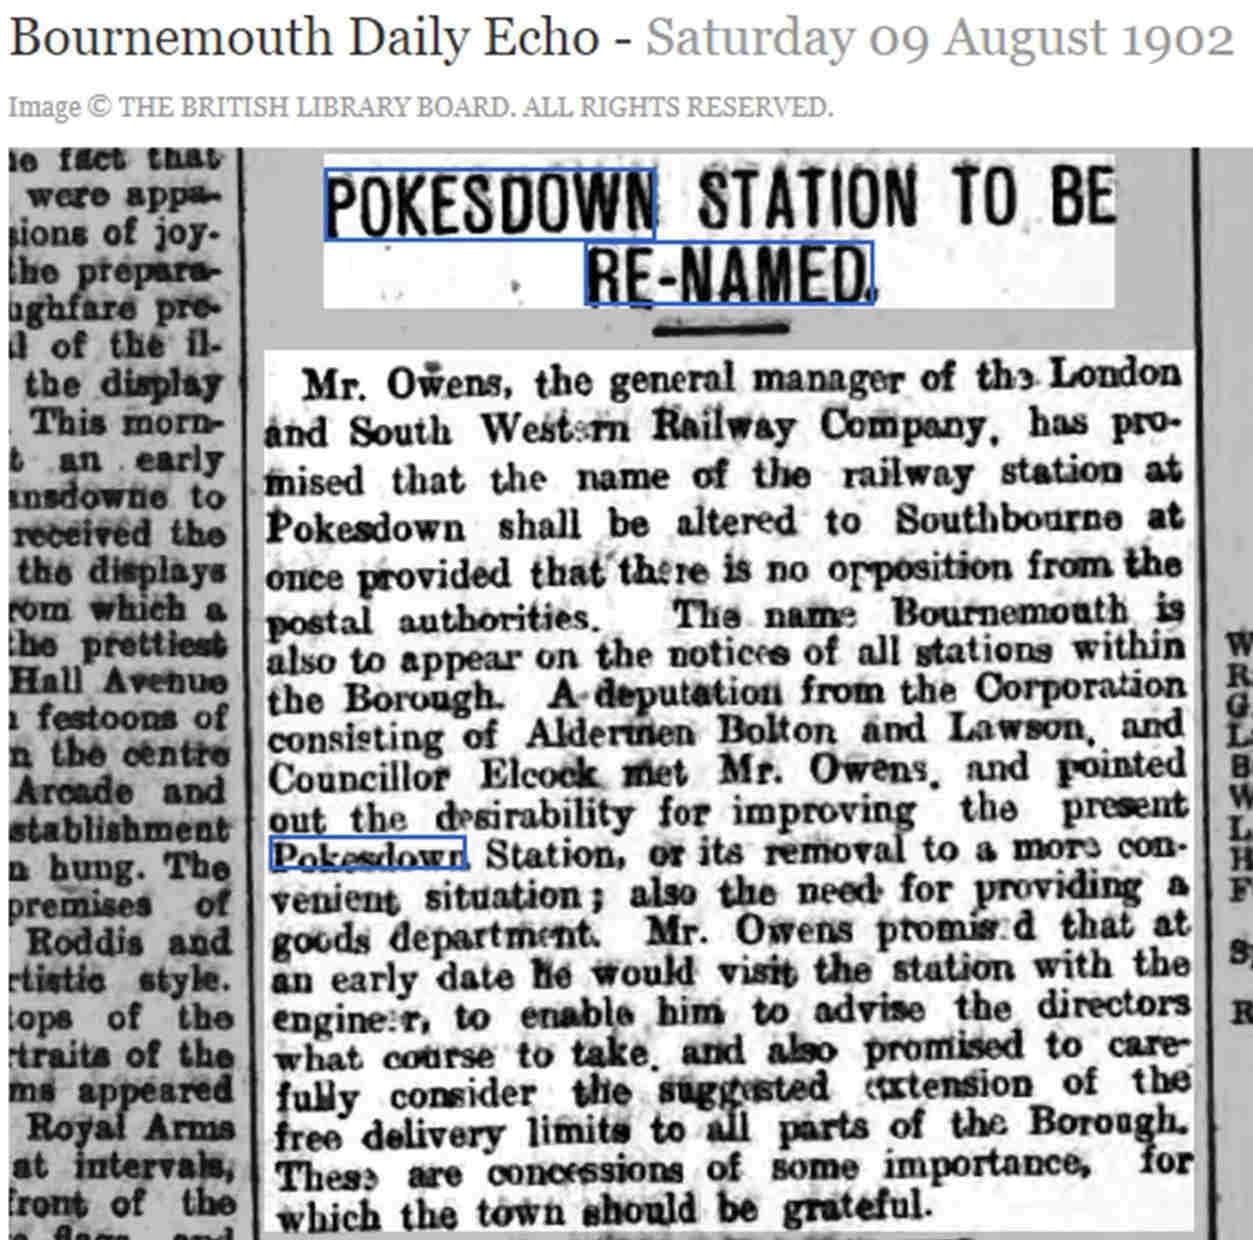 Bournemouth Daily Echo article 1902 suggesting change of name from Pokesdown to Southbourne